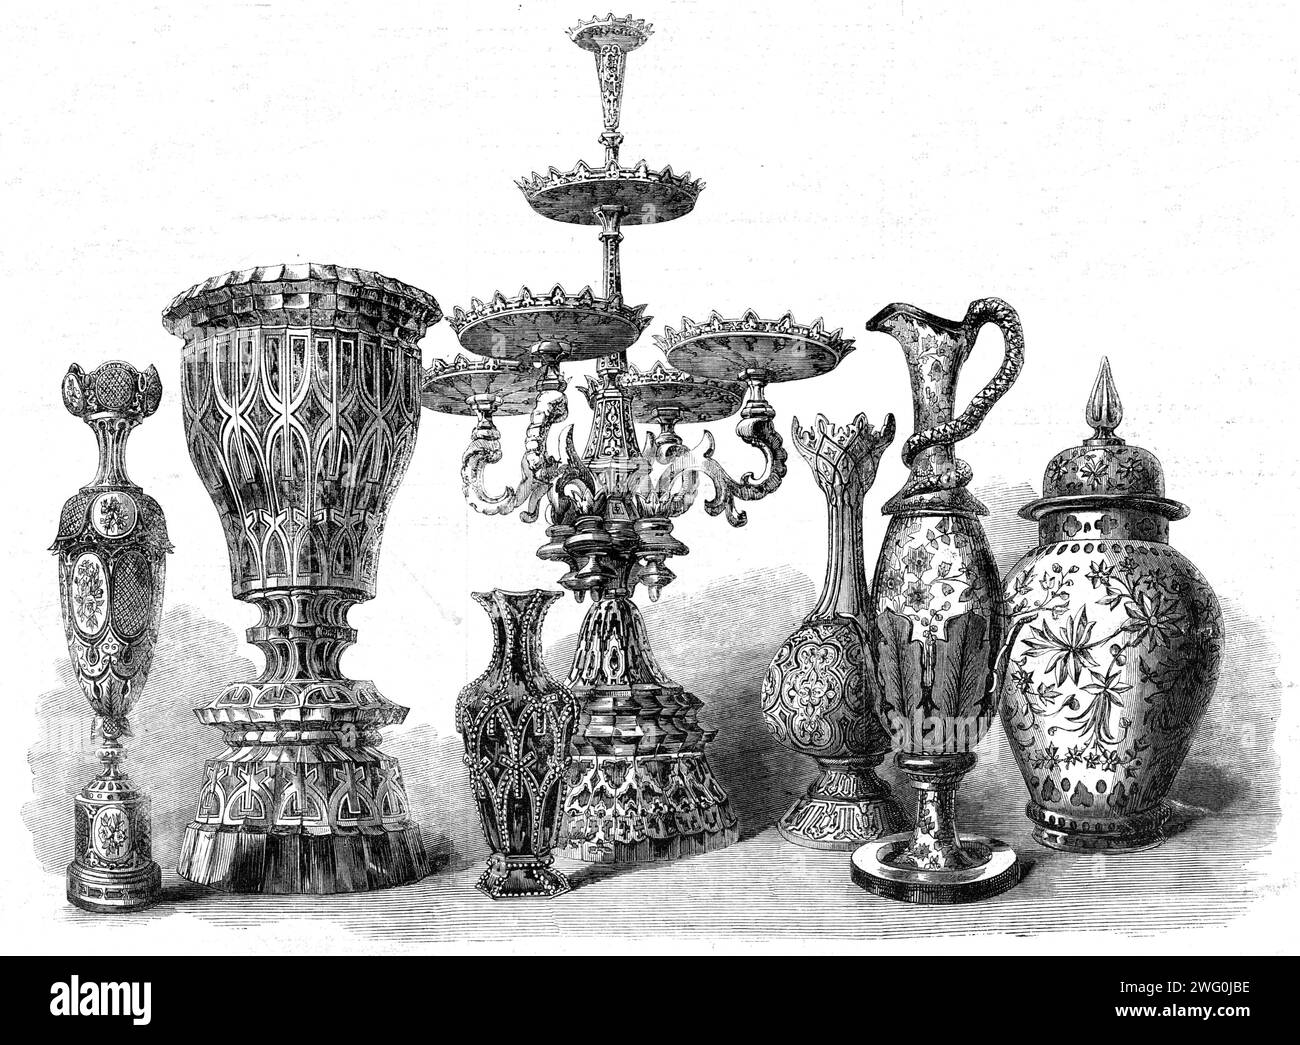 The International Exhibition: Bohemian glass, by Harrach of Bohemia, and Hofmann of Prague, in the Austrian Court, 1862. 'The central object...has its dishes and central column wrought of red glass cut into flat facets enriched with burnished gold...Both the large urn, or cup-shaped vessel, and the small vase in front of the dessert-dish, are in imitation malachite, the opaque striae and convolutions resulting from white glass being mingled with the dark green material of which they are formed...The elongated vase mounted on a pedestal...is formed of transparent green glass, which has been cov Stock Photo